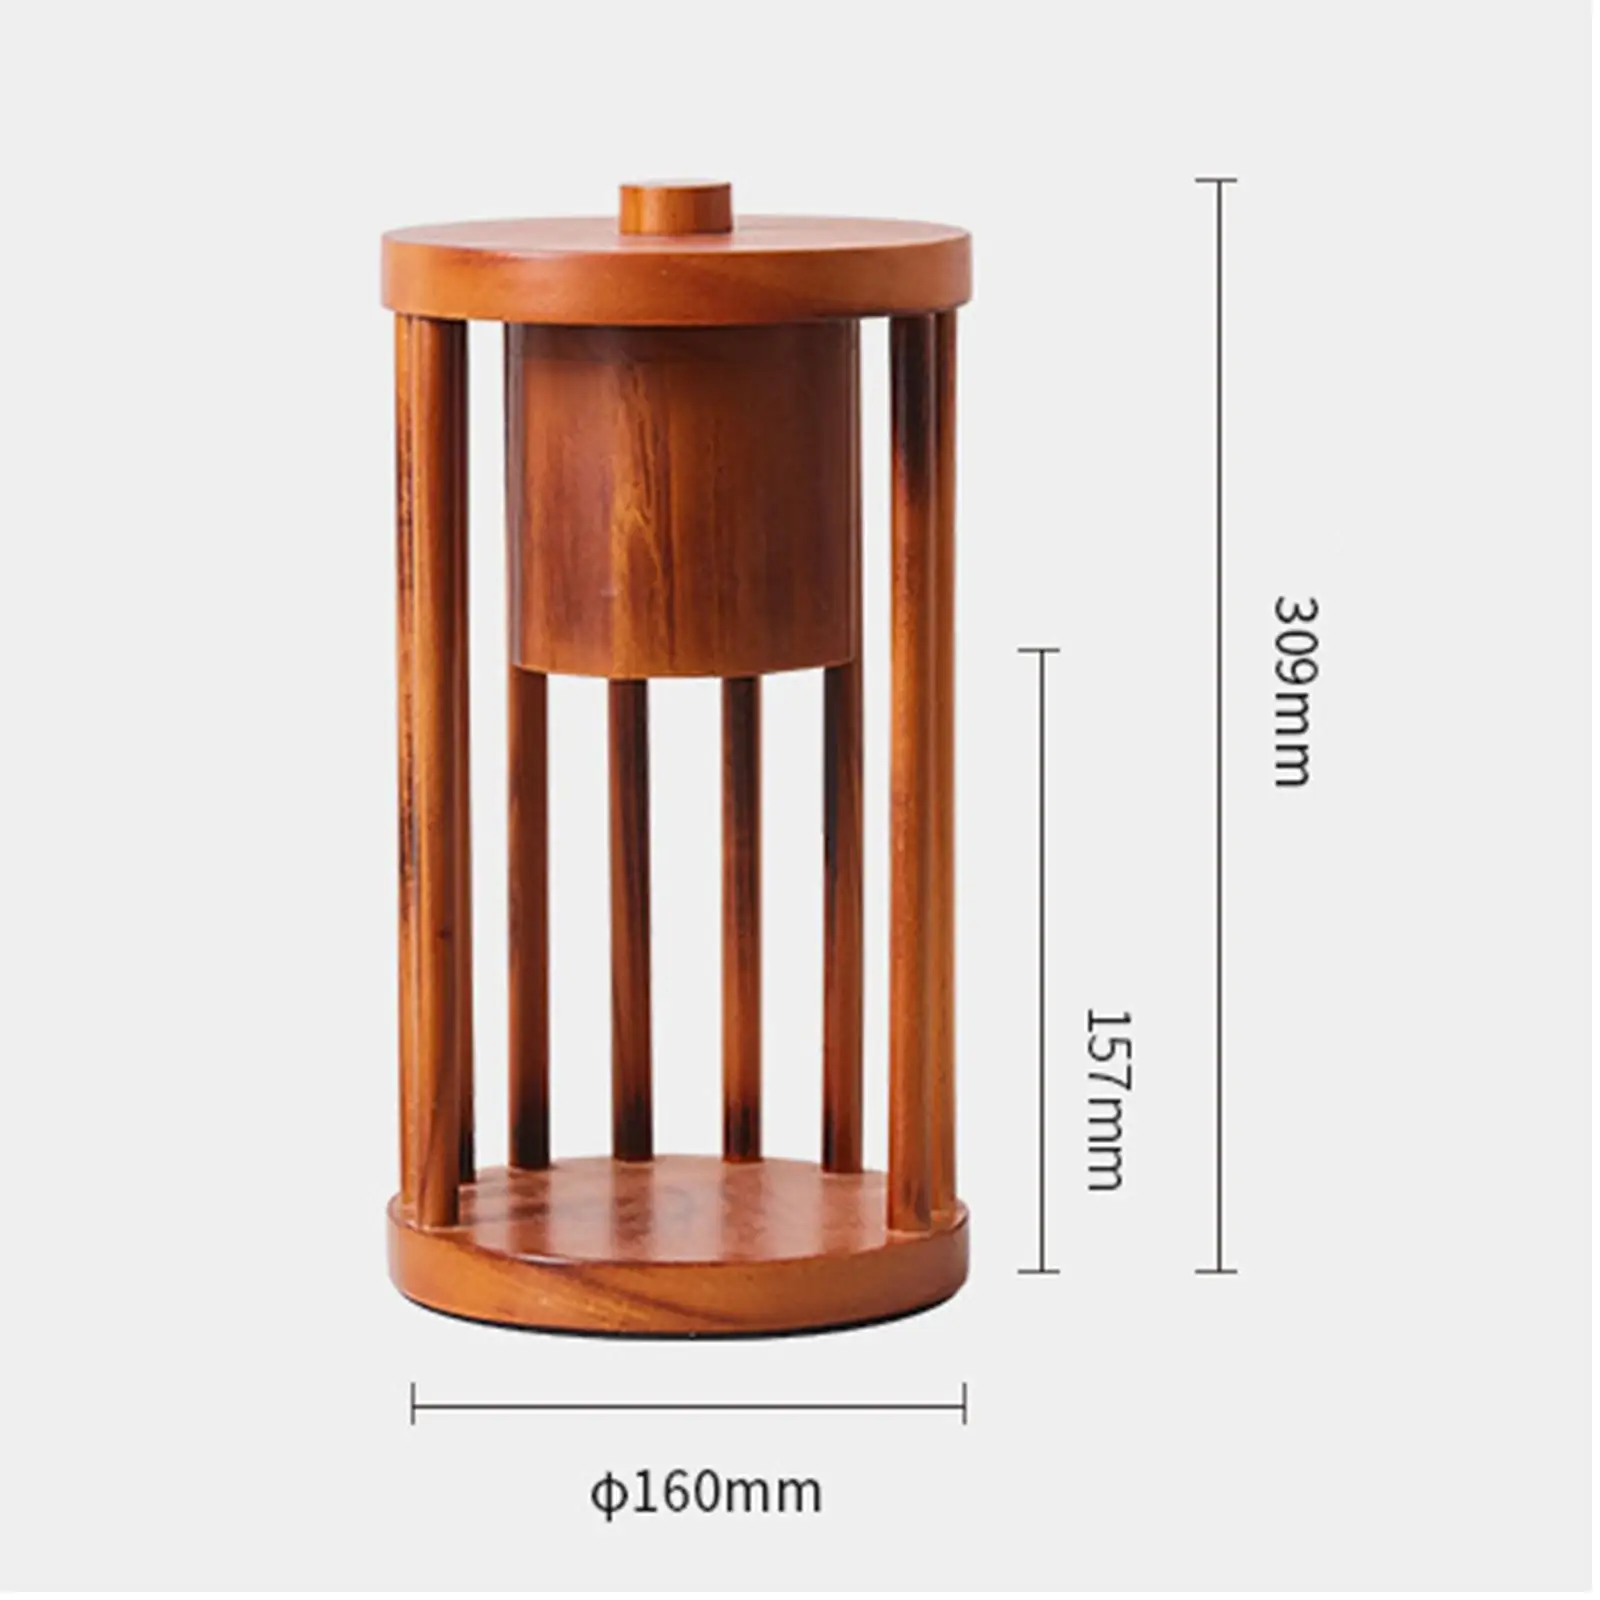  Melting Heater Candle Warmer  Candle Warmer Lamp for Tabletop